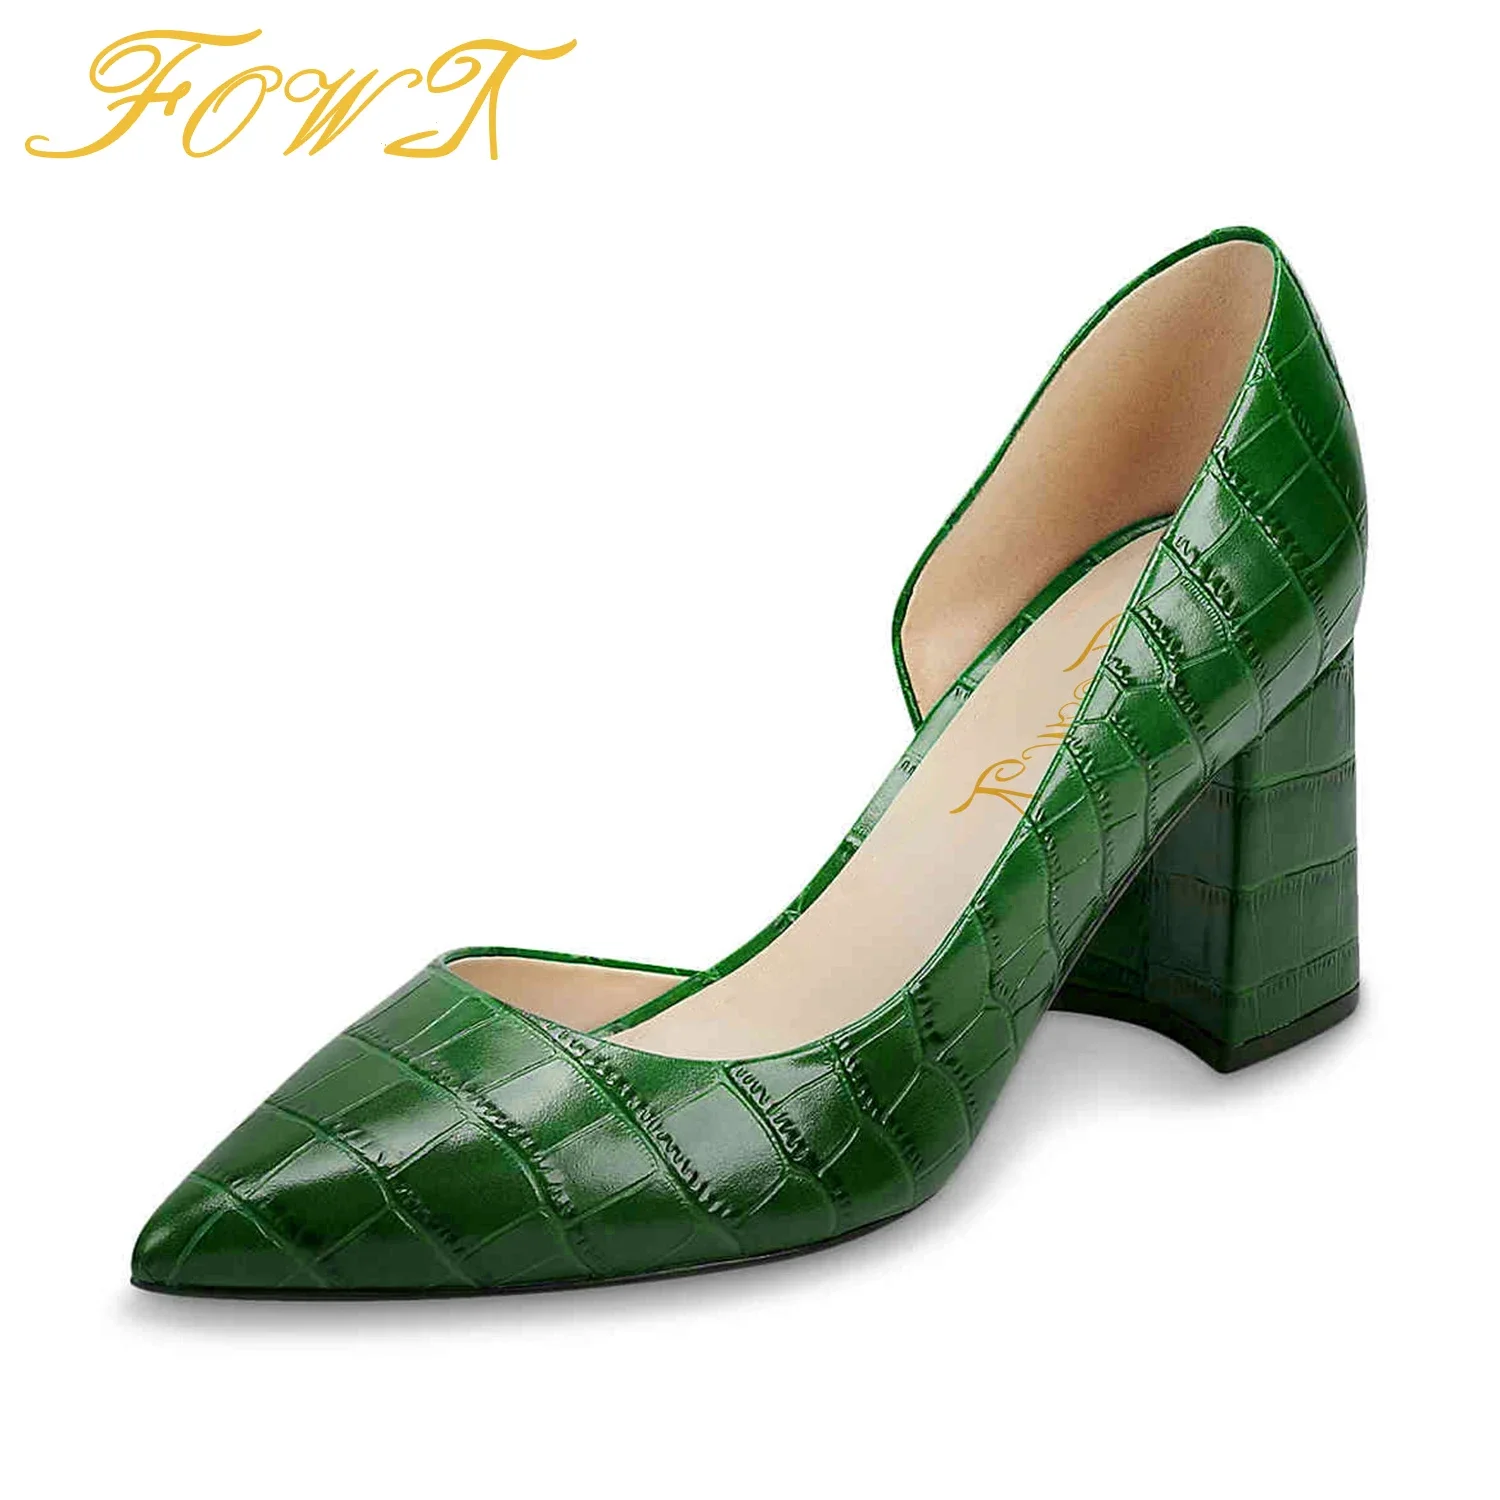 

Green Crocodile D'Orsay Women Pumps Patent Leather Square Heels Pointed Toe Autumn Office Fashion Ladies Shoes Large Size 43 44G